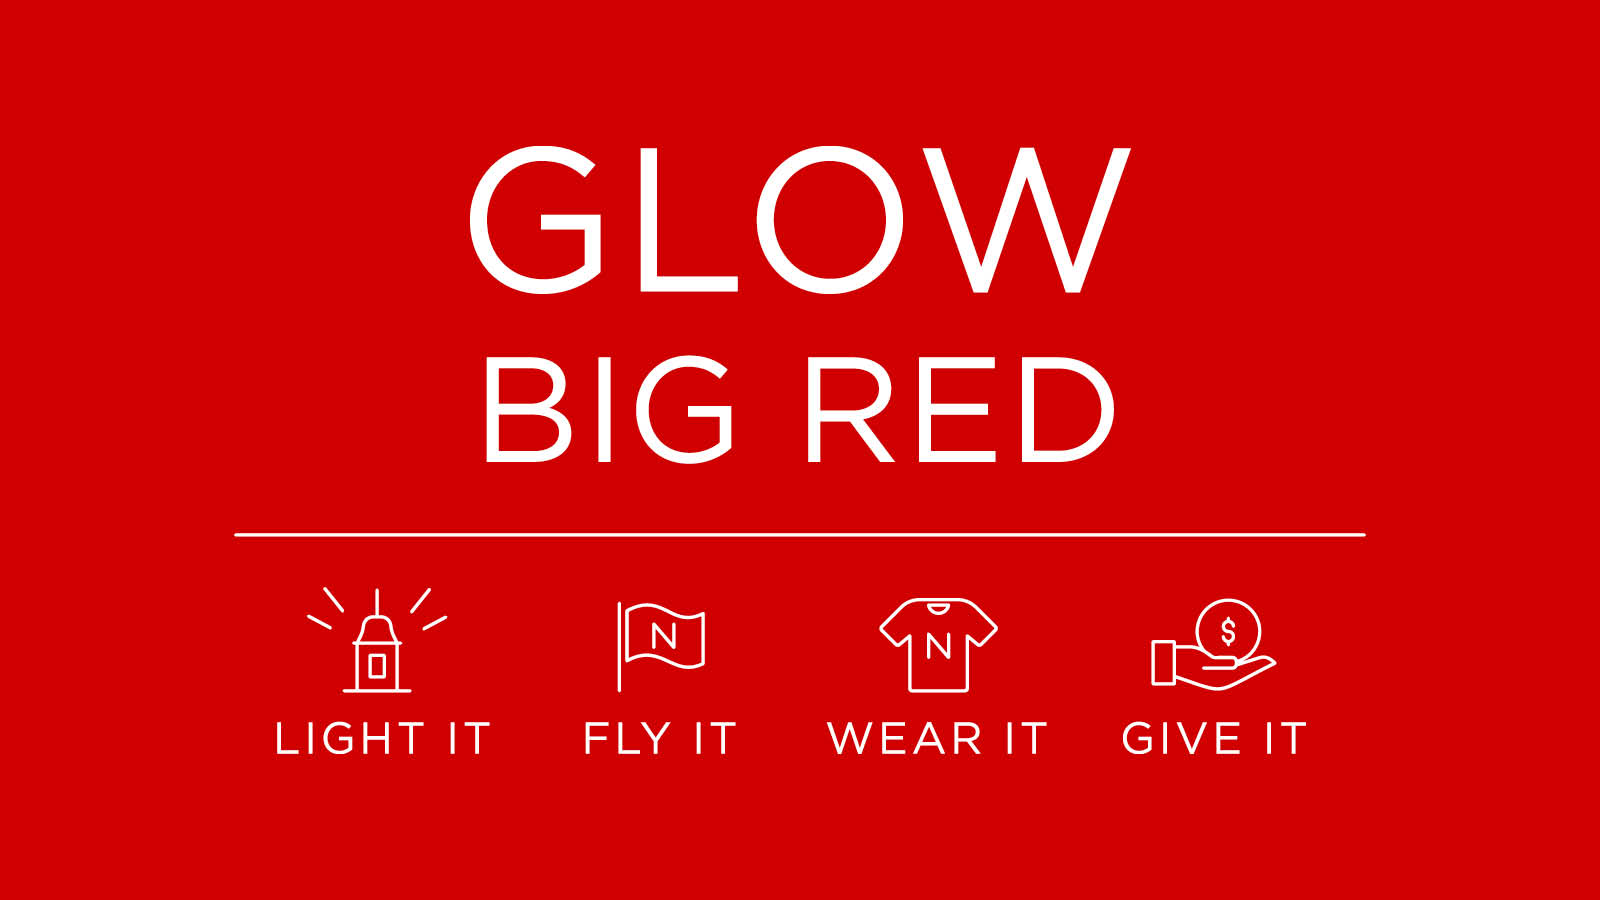 Glow Big Red on February 14th and 15th